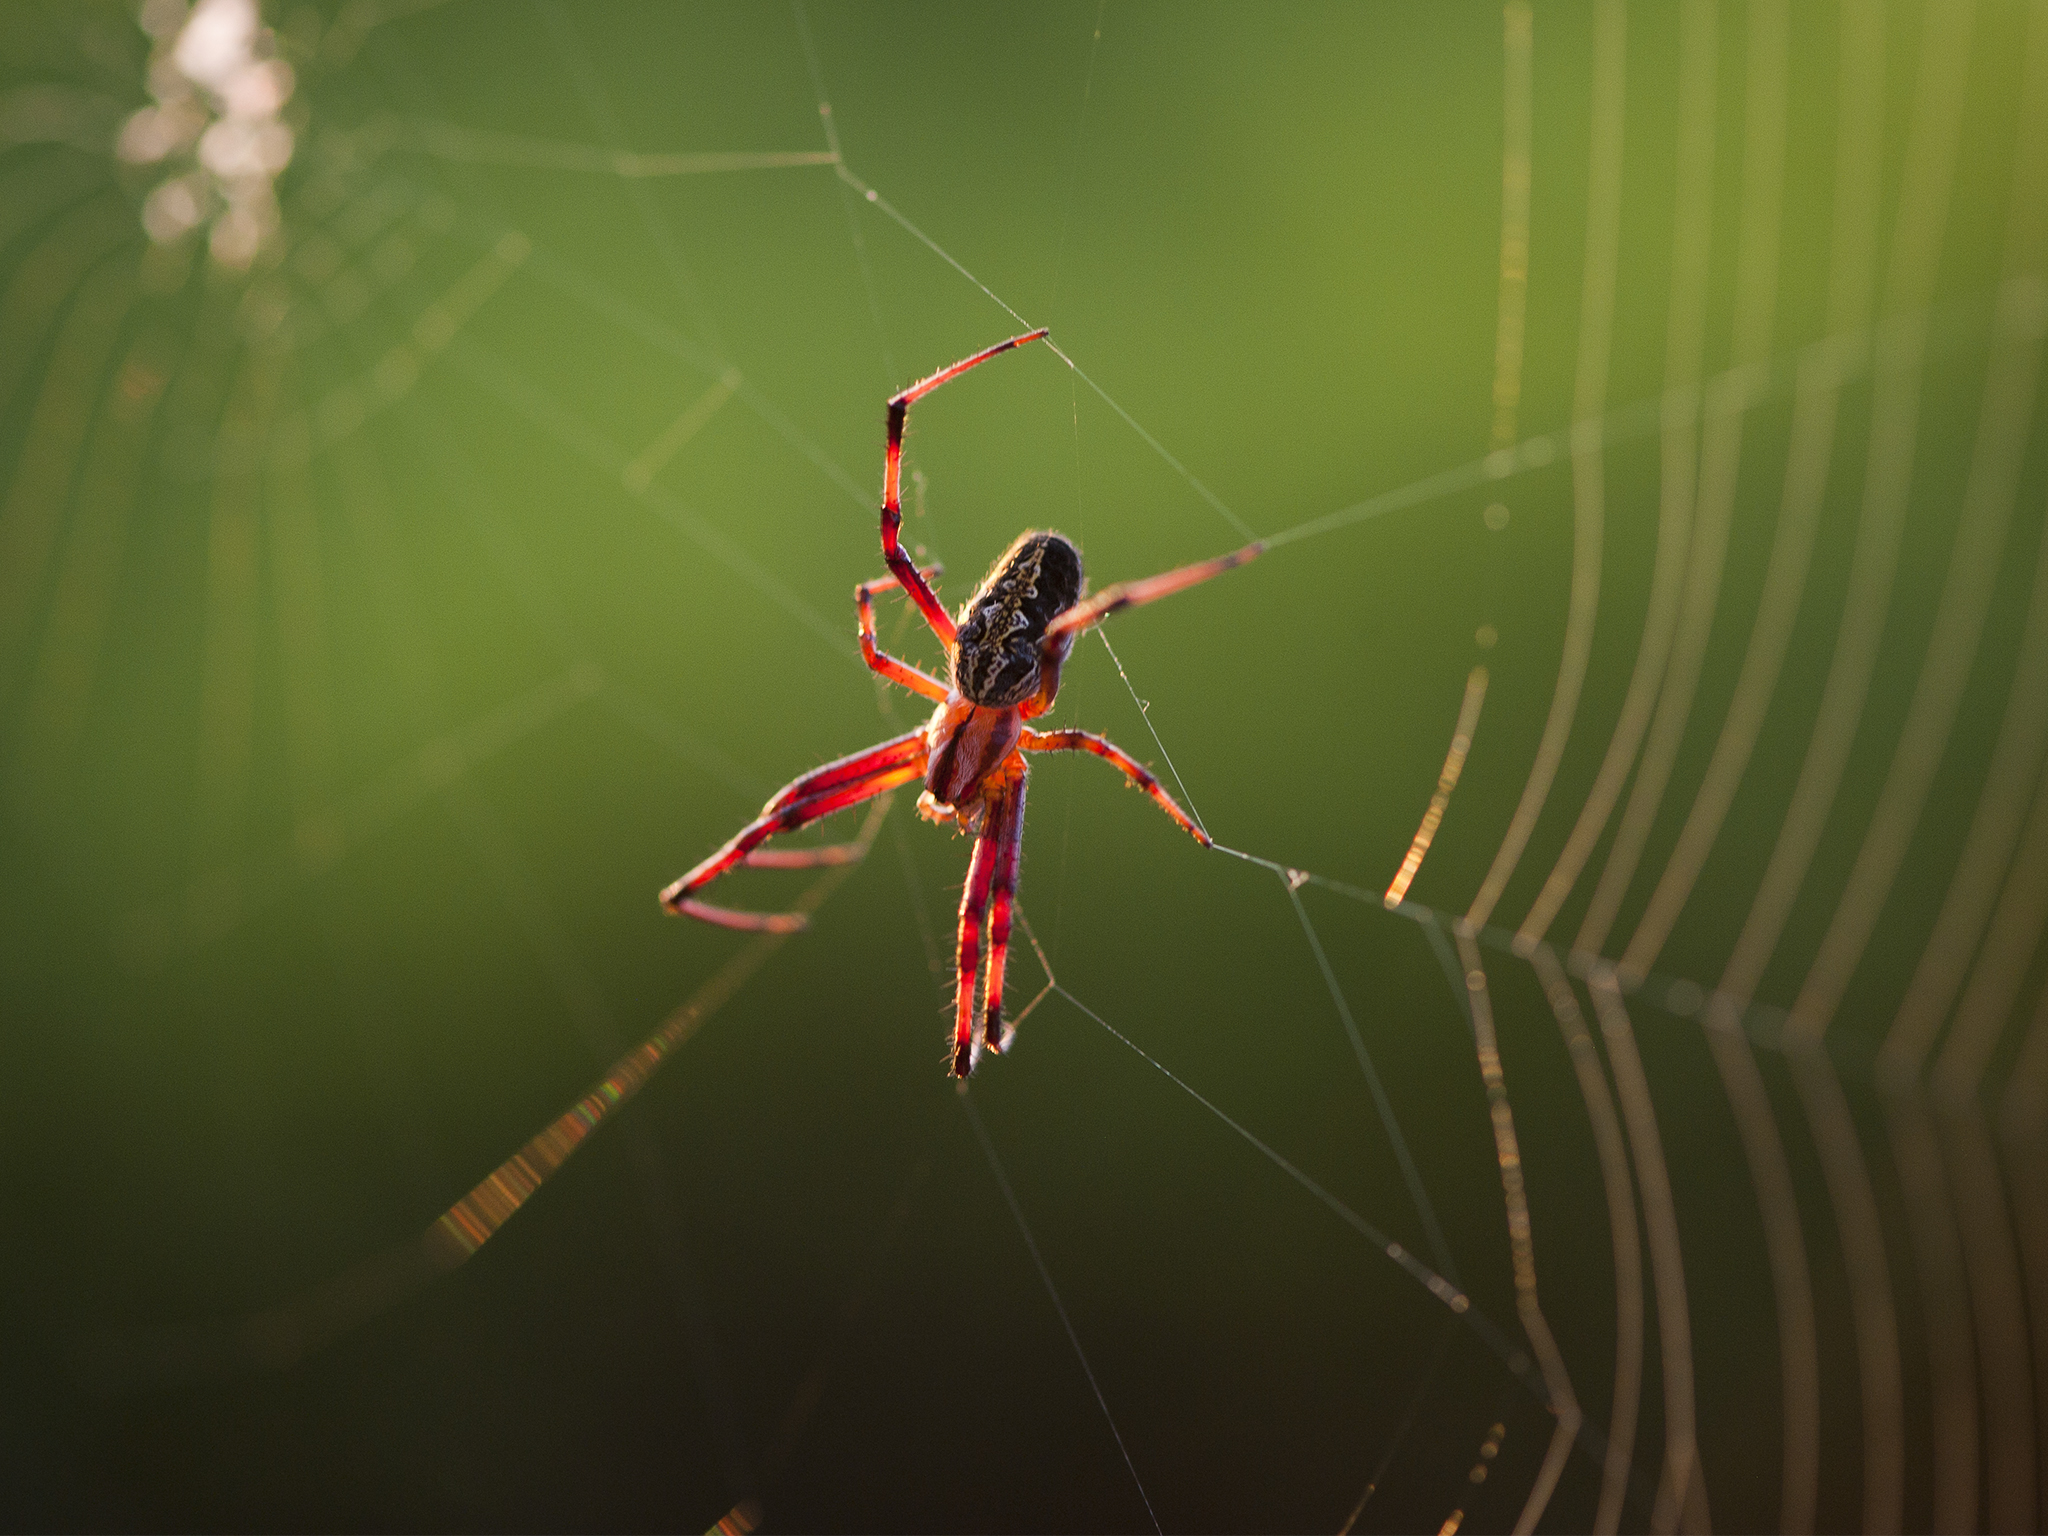 Spiders Listen to Their Webs | Innovators